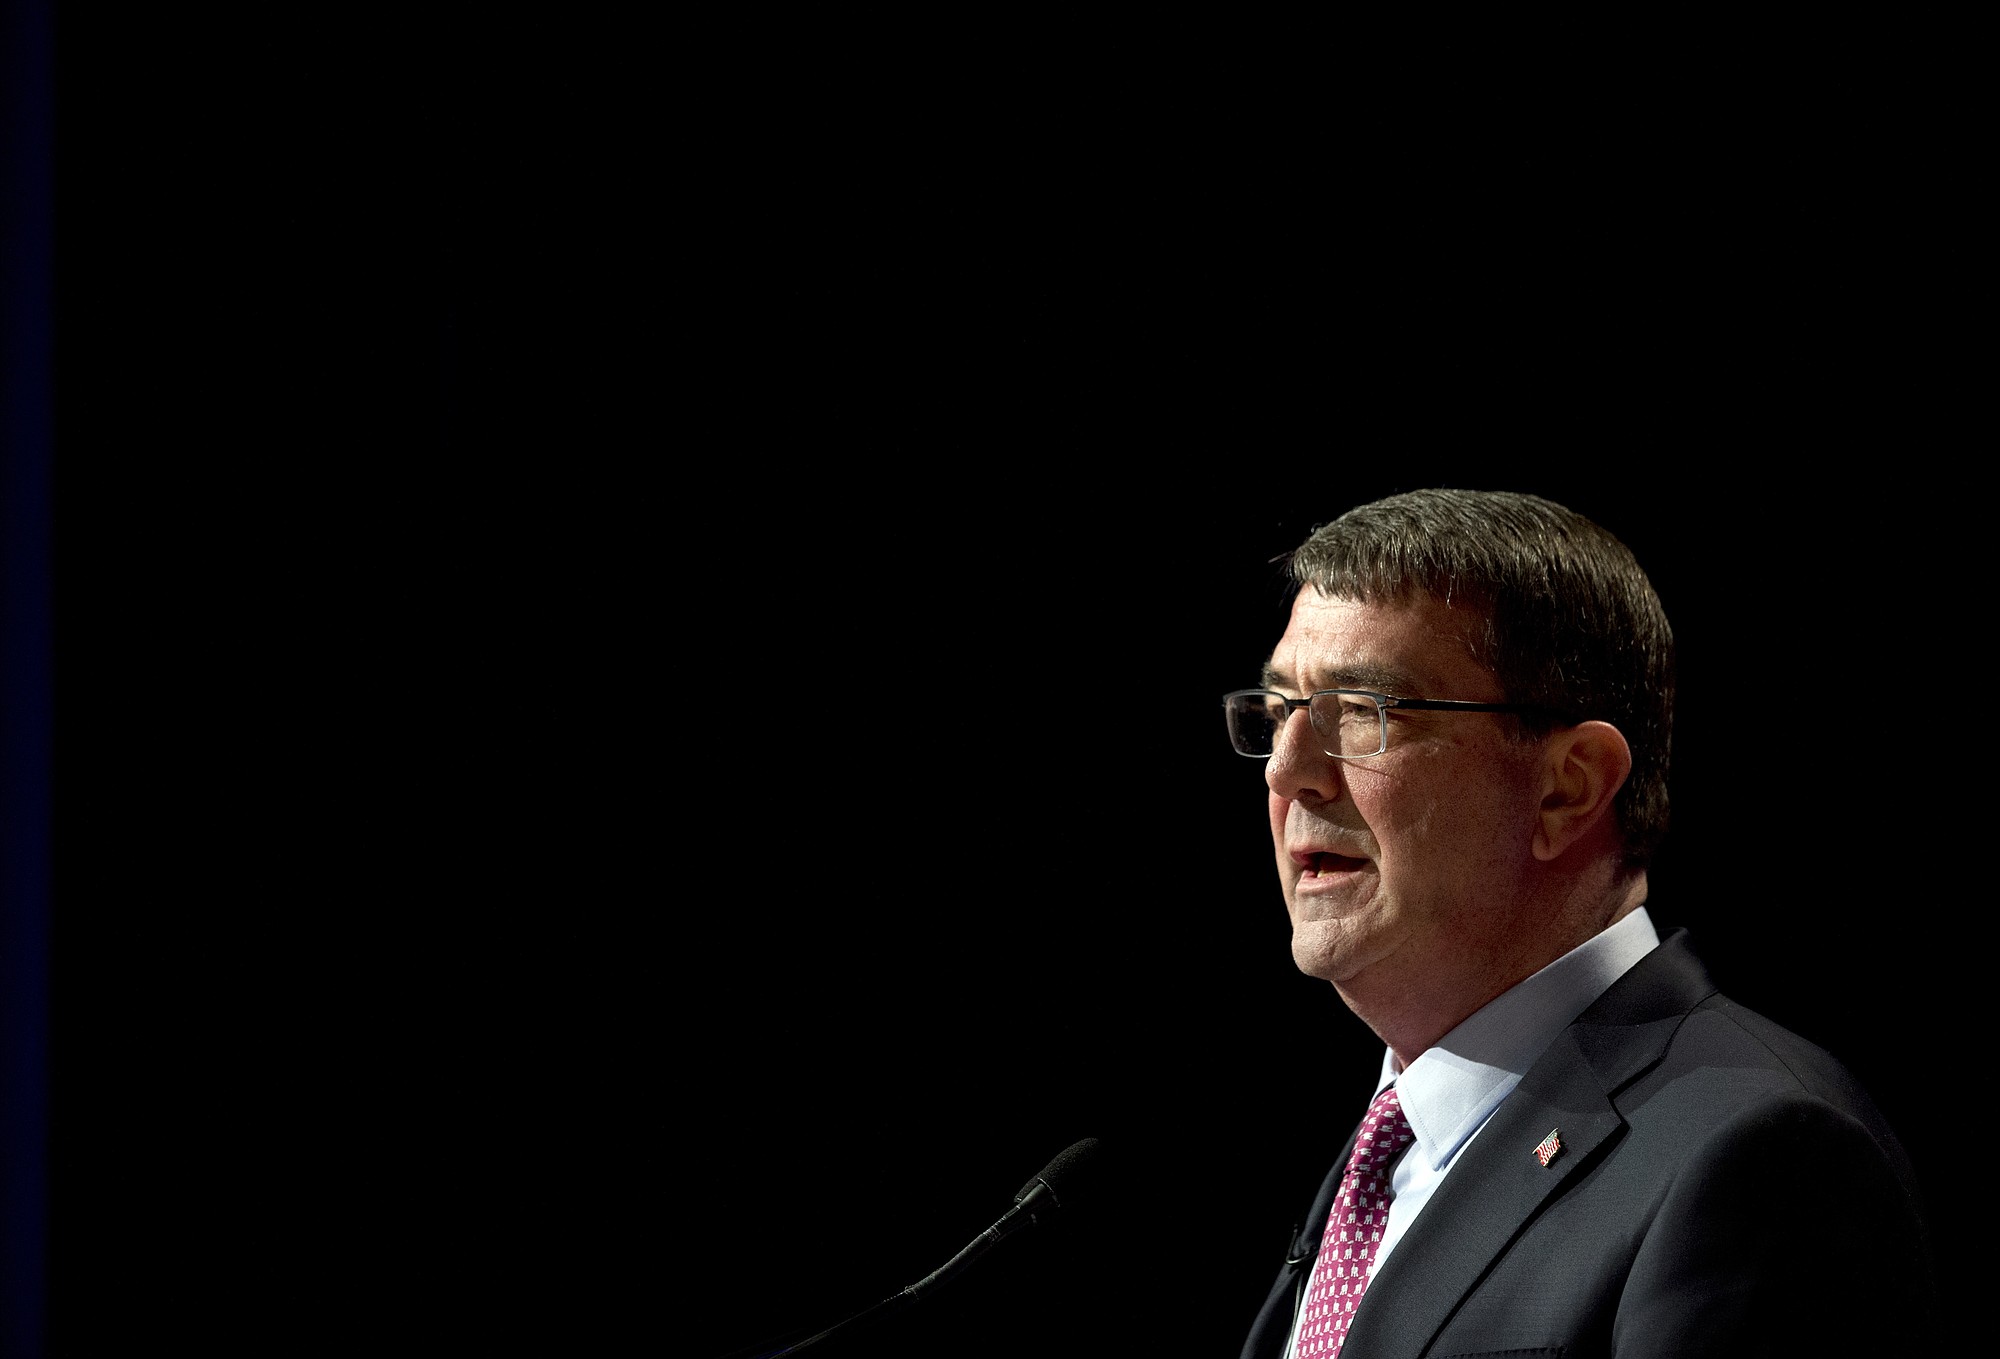 Defense Secretary Ash Carter, speaking during a ceremonial swearing-in ceremony at the Pentagon.